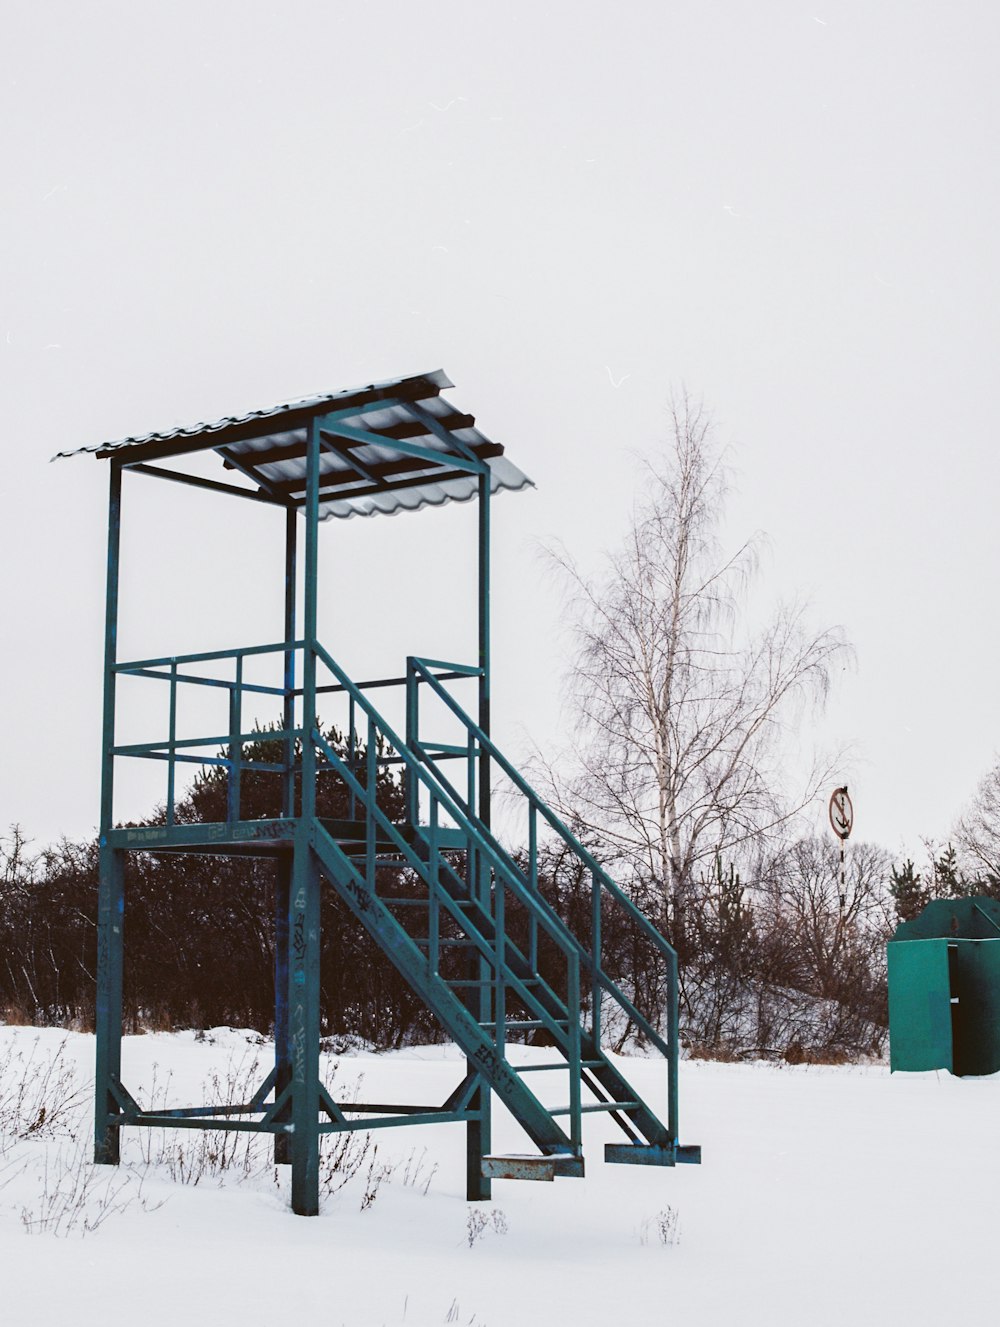 a small metal structure in the middle of a snowy field